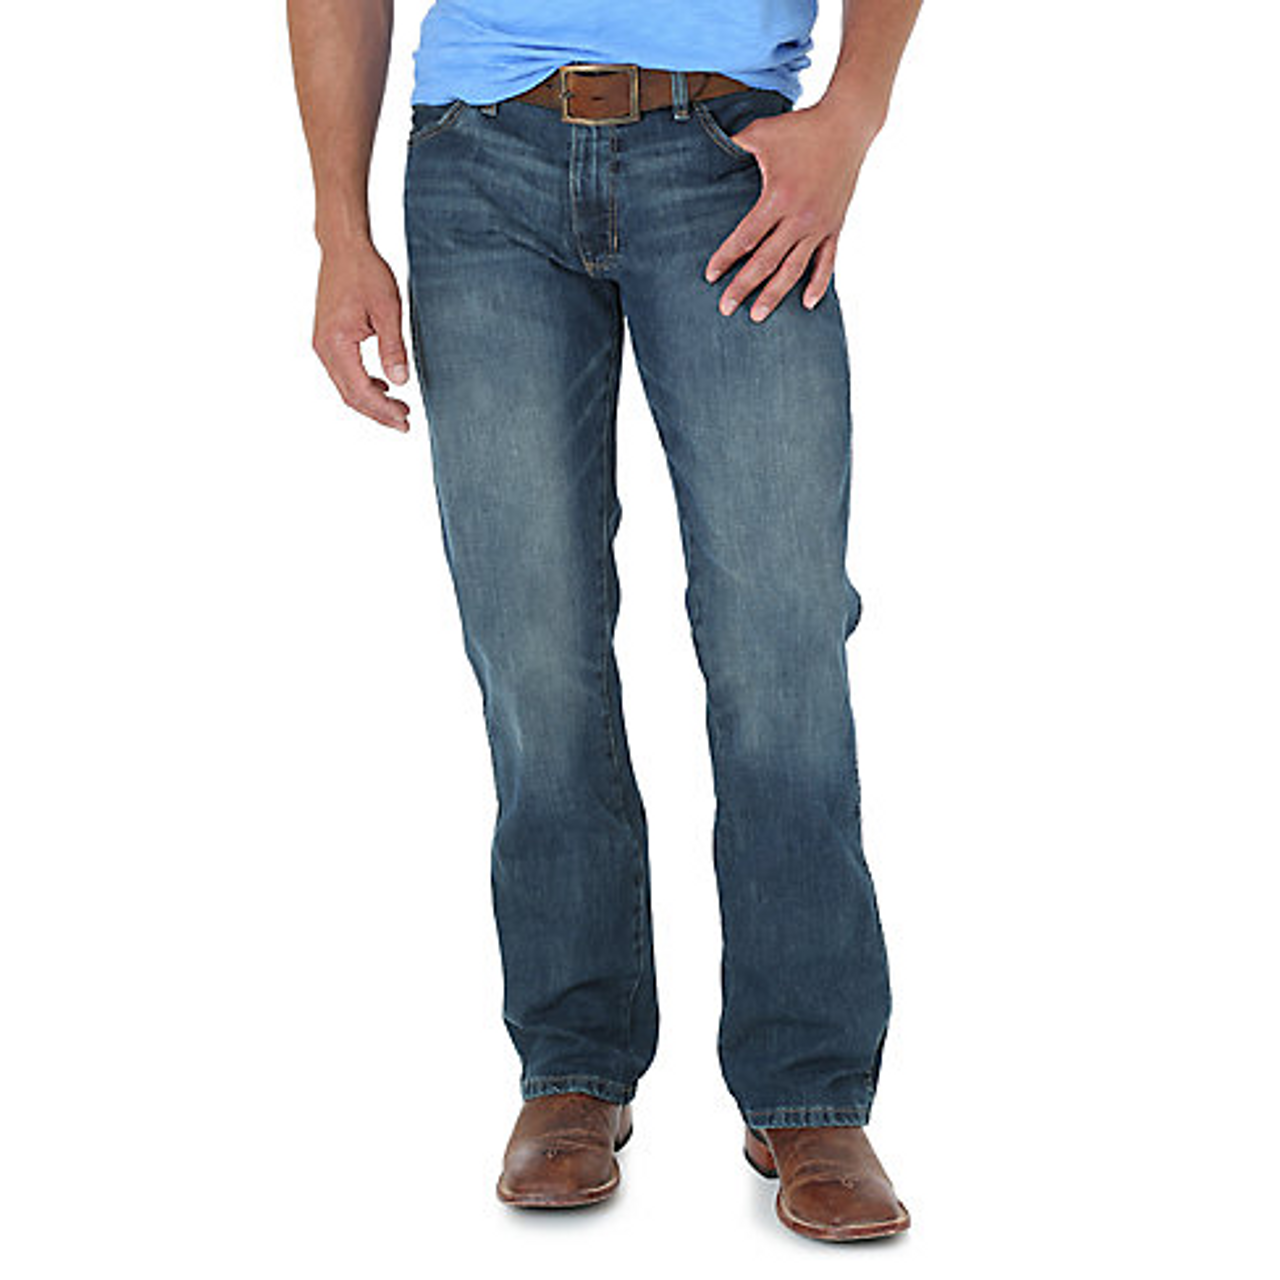 Wrangler Mens Jeans - Retro - Slim Fit - Bootcut - River Wash - Billy's ...